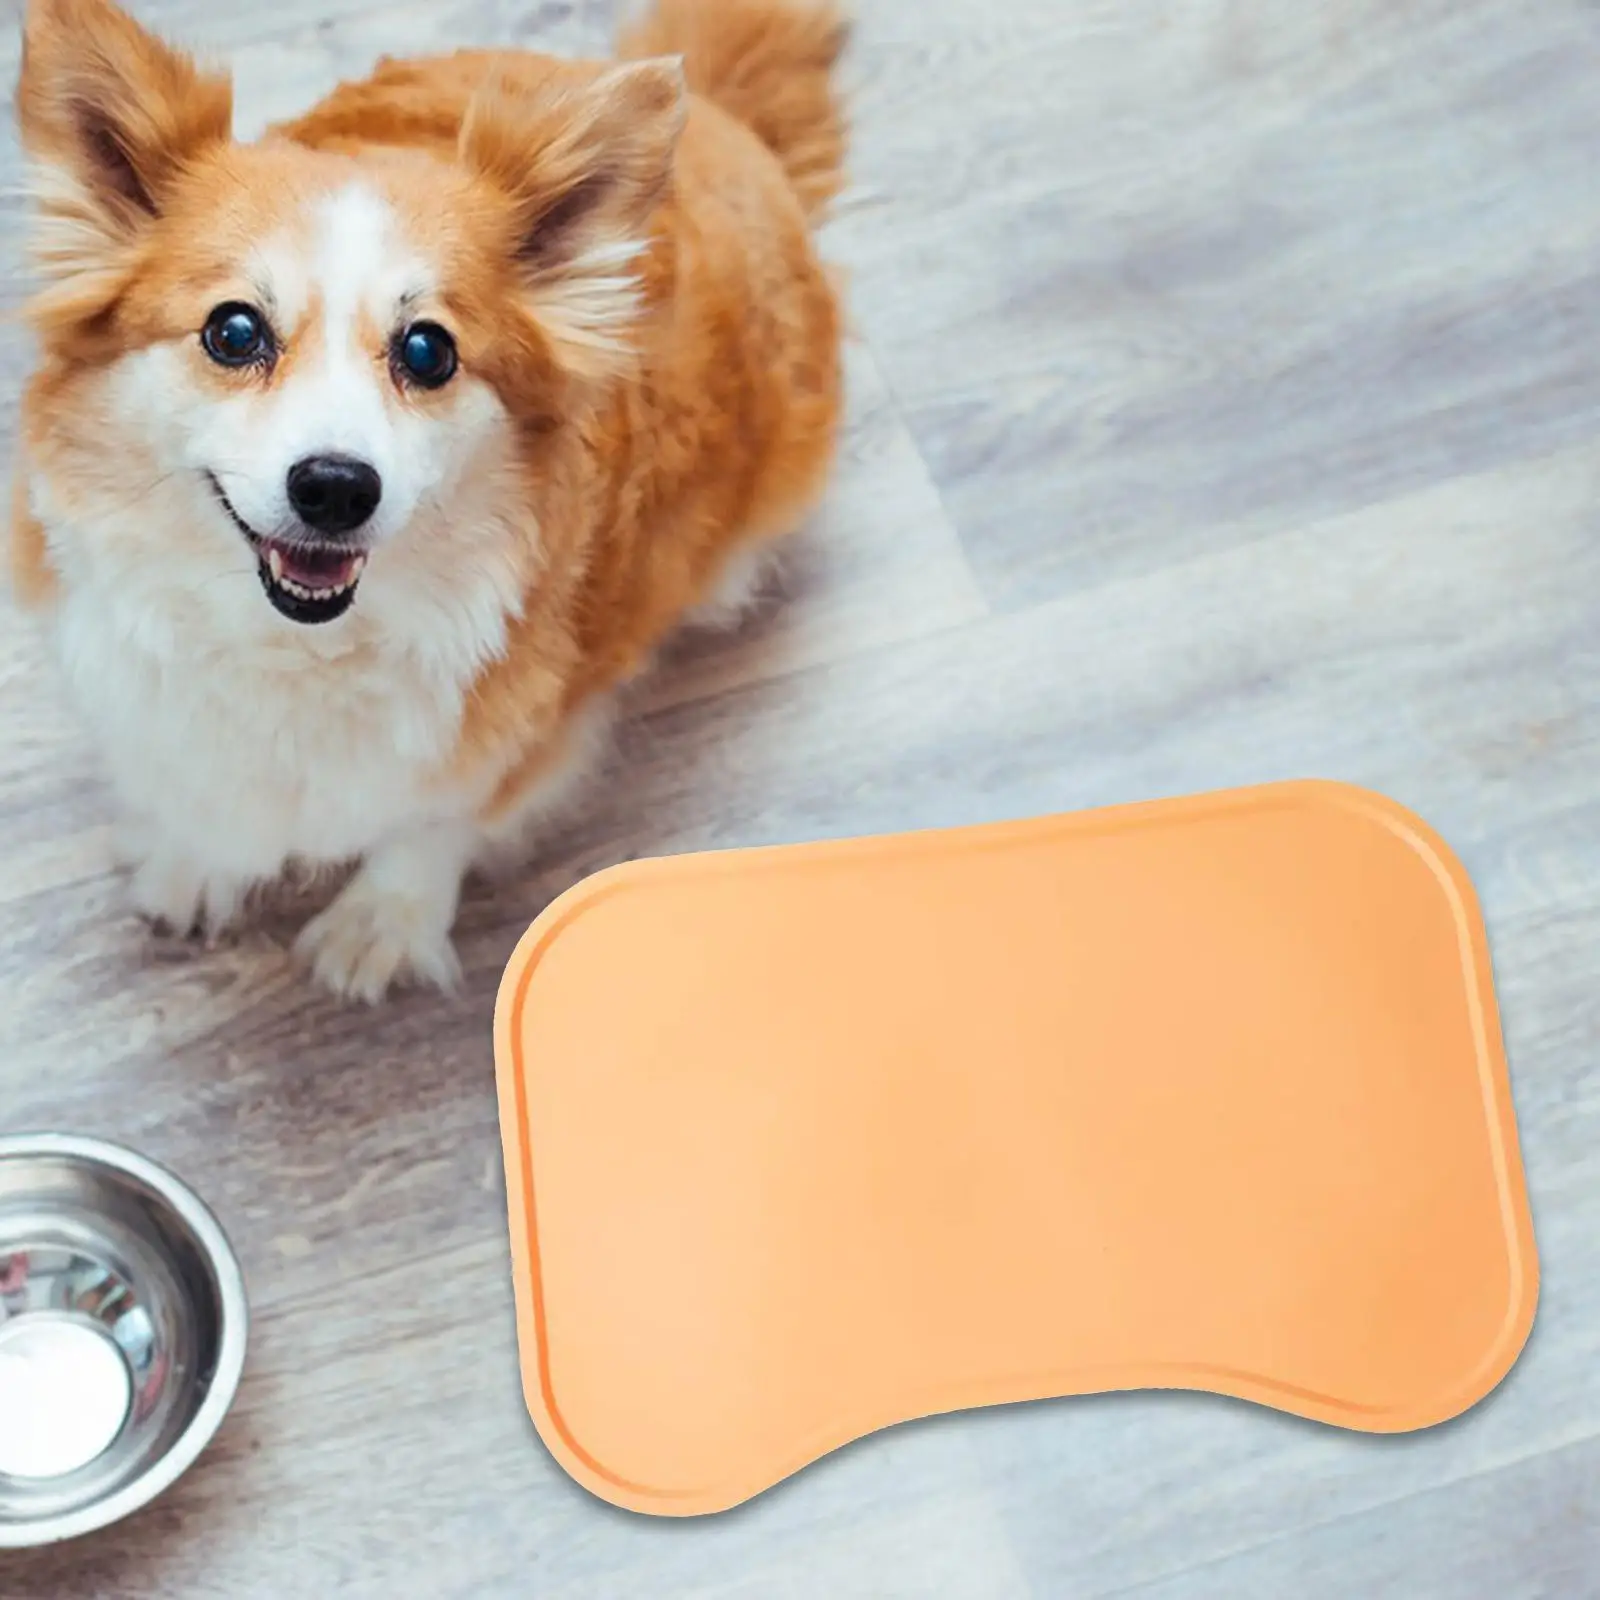 Pet Dog Food Mat, Cat Placemat Feeding Mat Dish Tray Pad, Waterproof with Raised Edges Non Slip for Dogs and Cats